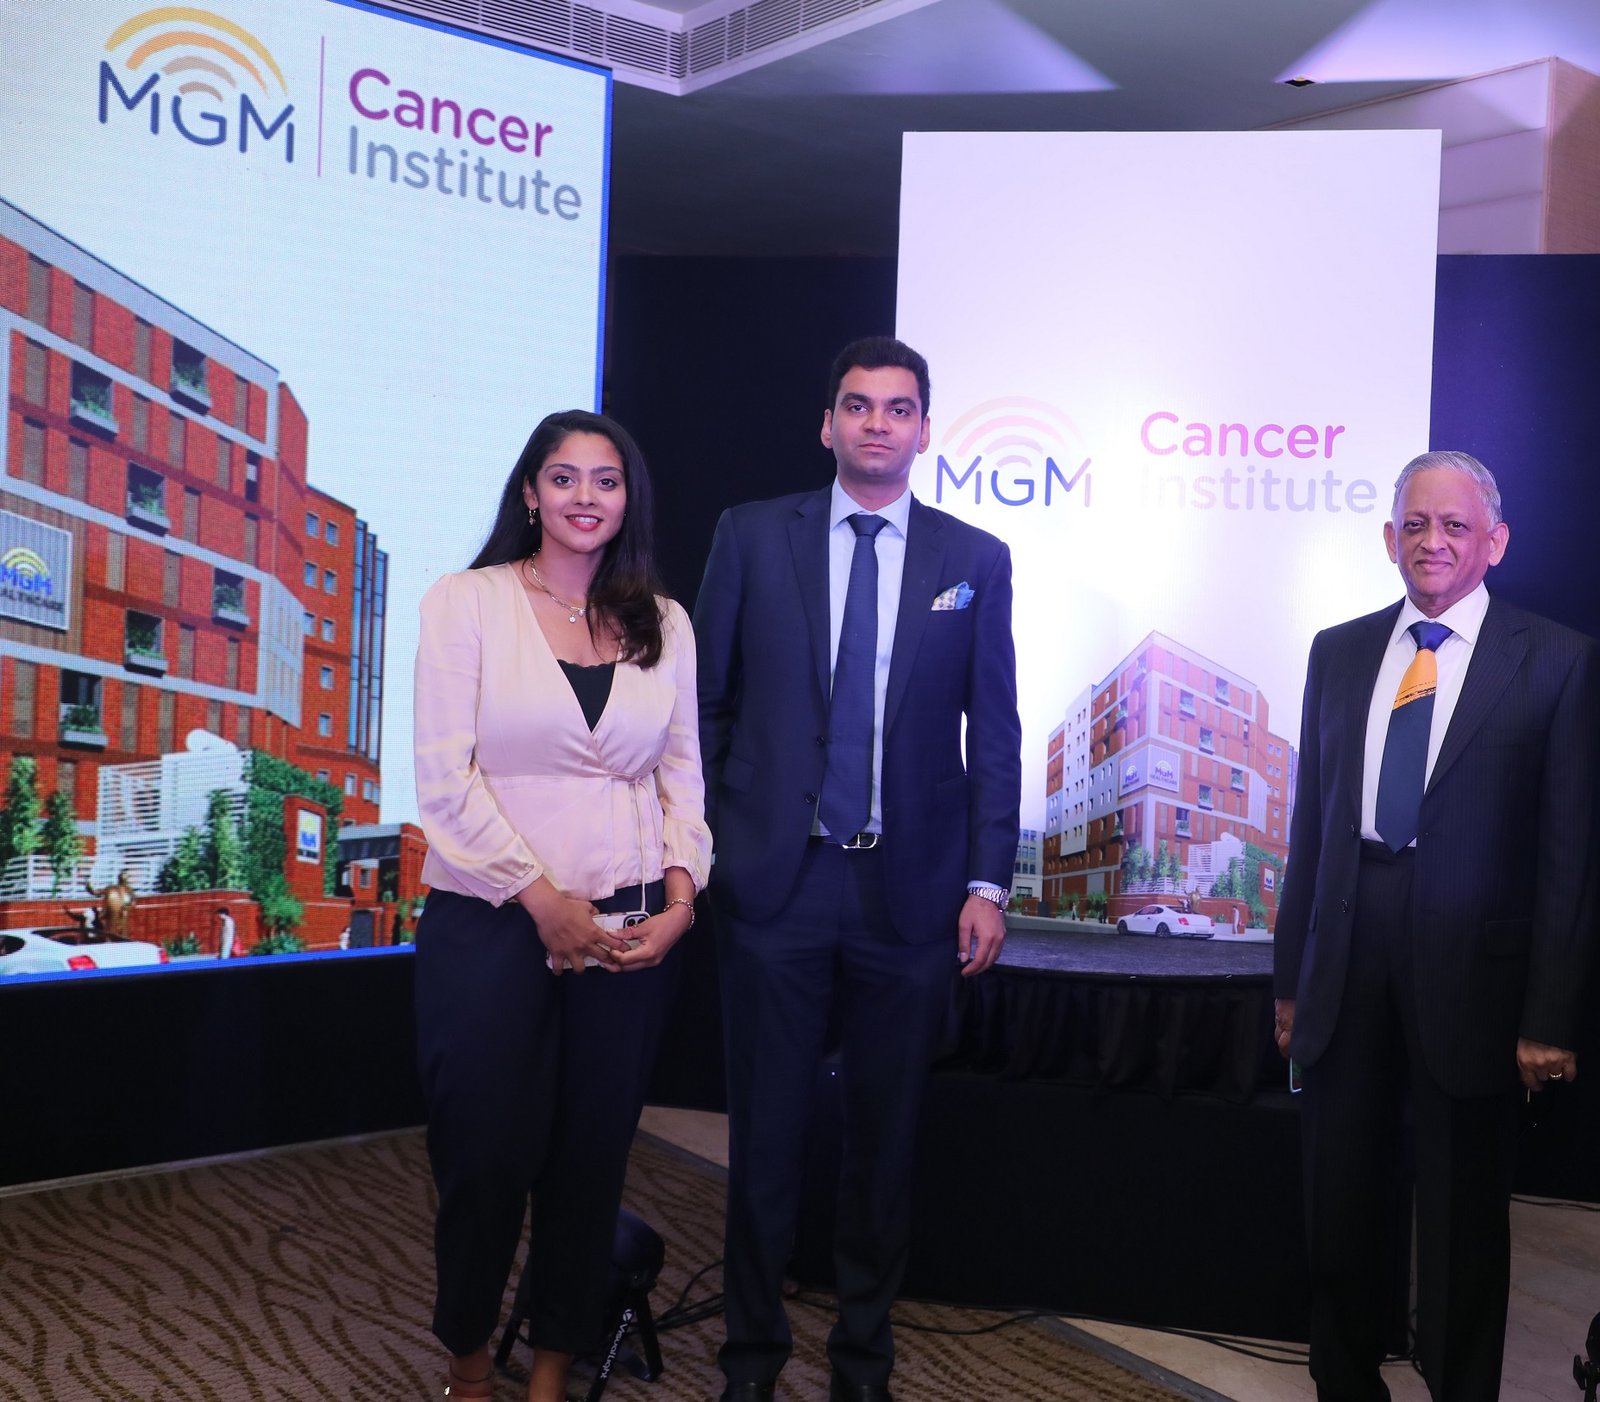 The Announcement of a Dedicated Cancer Centre by MGM Healthcare – MGM CANCER INSTITUTE